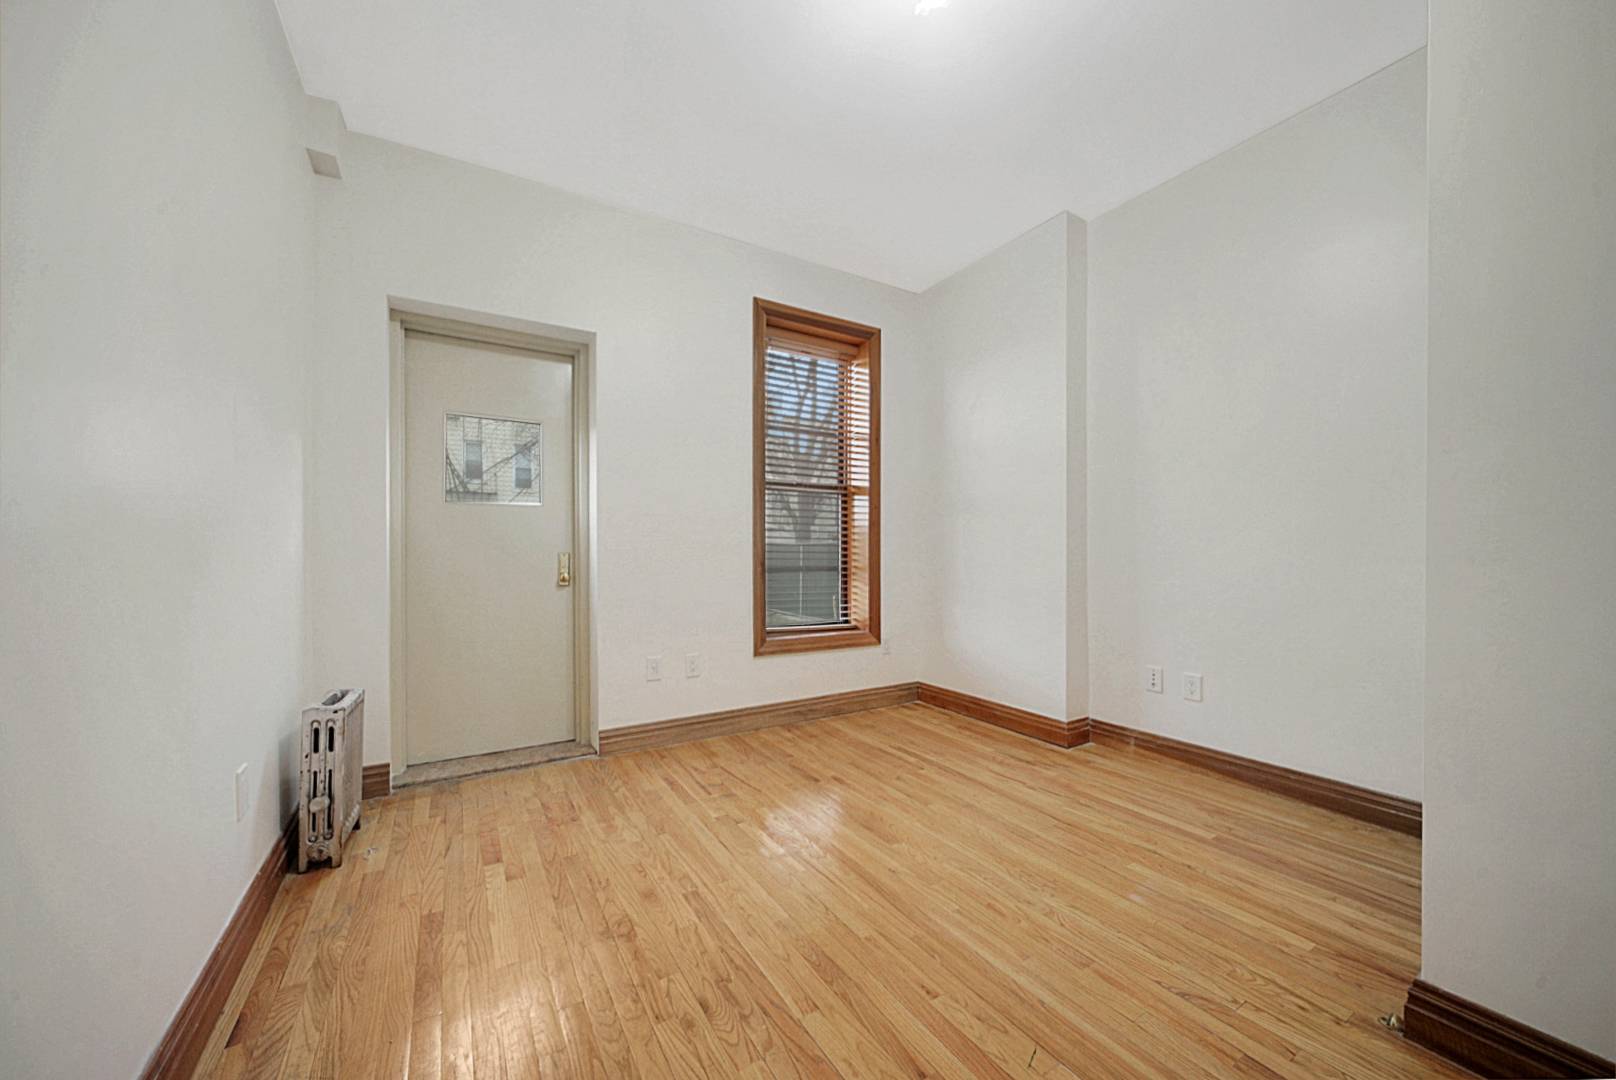 RENOVATED 2 BEDROOM REDONE OUTDOOR SPACE WITH TURF AND WOODEN FENCE Beautiful 2 bedroom in Gowanus with huge private backyard.